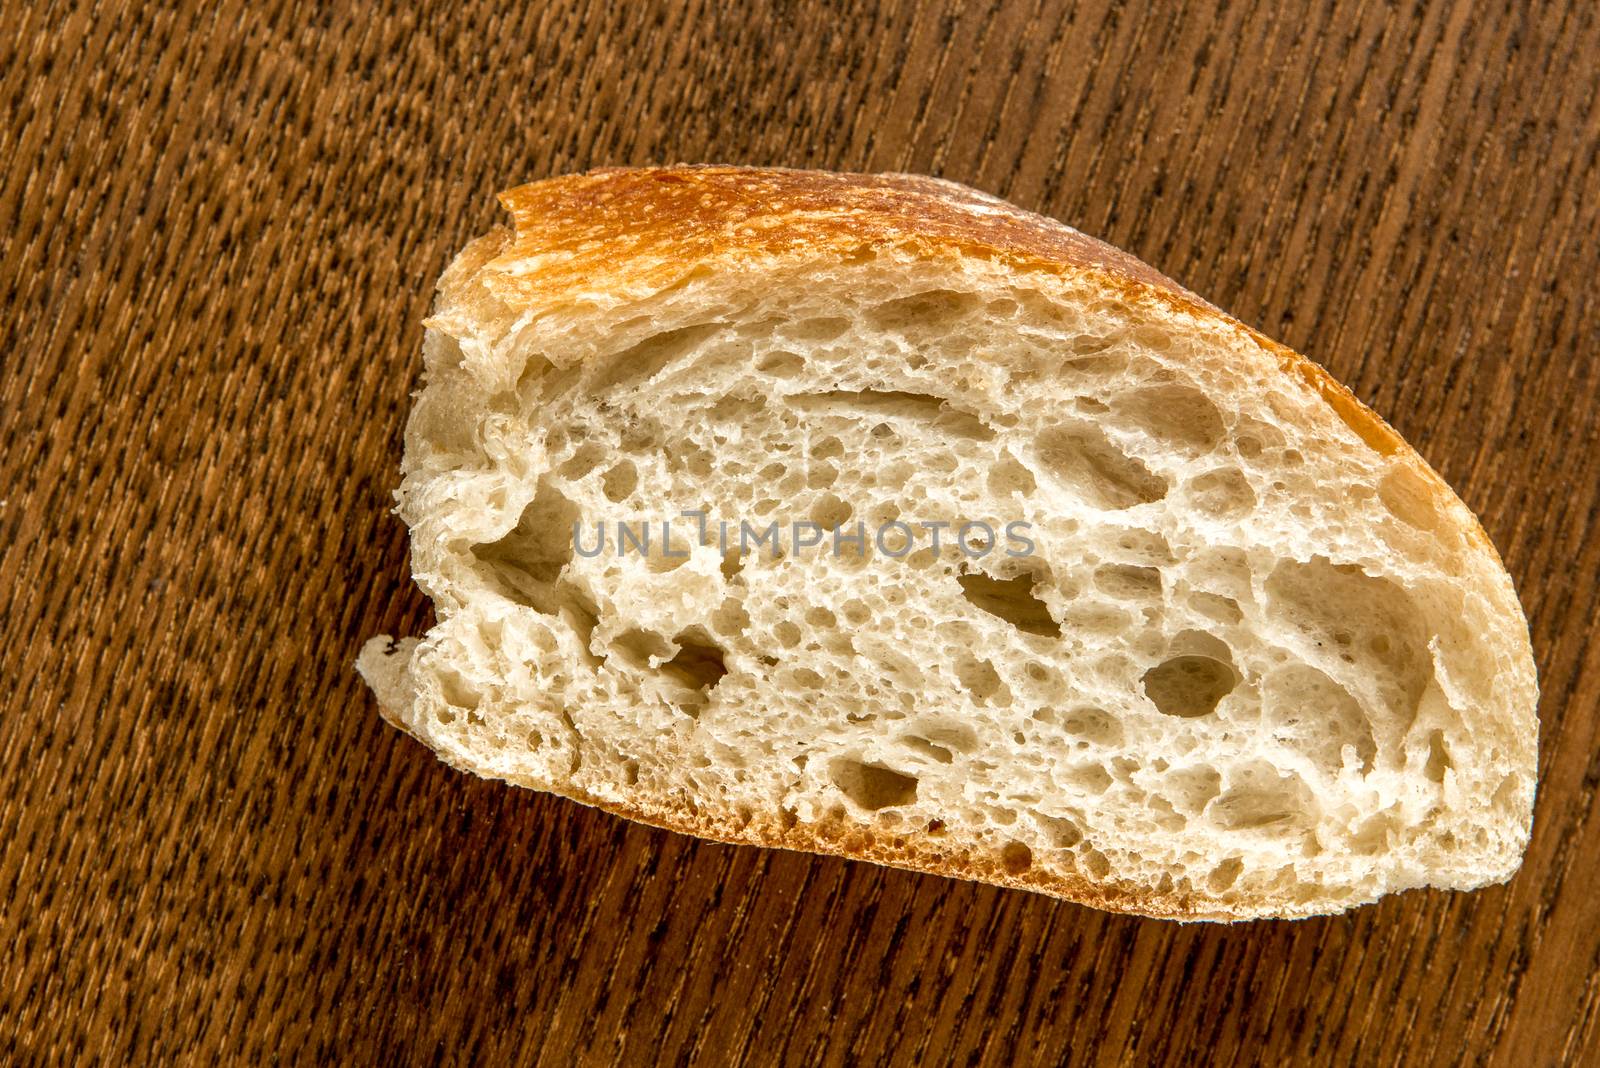 A piece of white baguette with an interesting texture is on the table